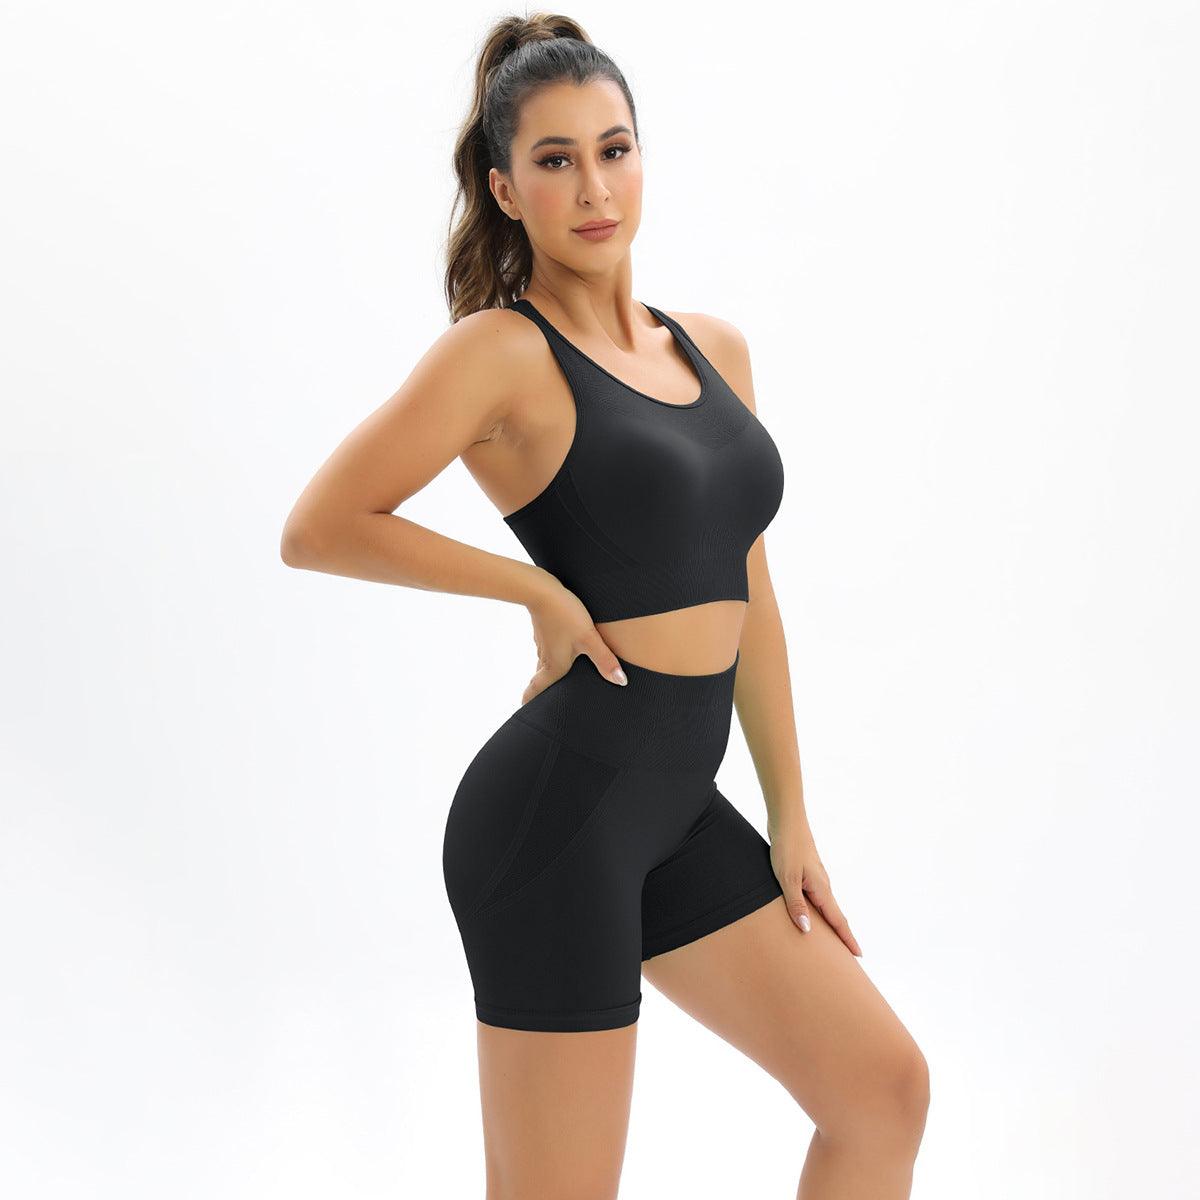 Knitted Seamless High Elastic Fitness Set - ForVanity sports sets, women's sports & entertainment Sports Sets